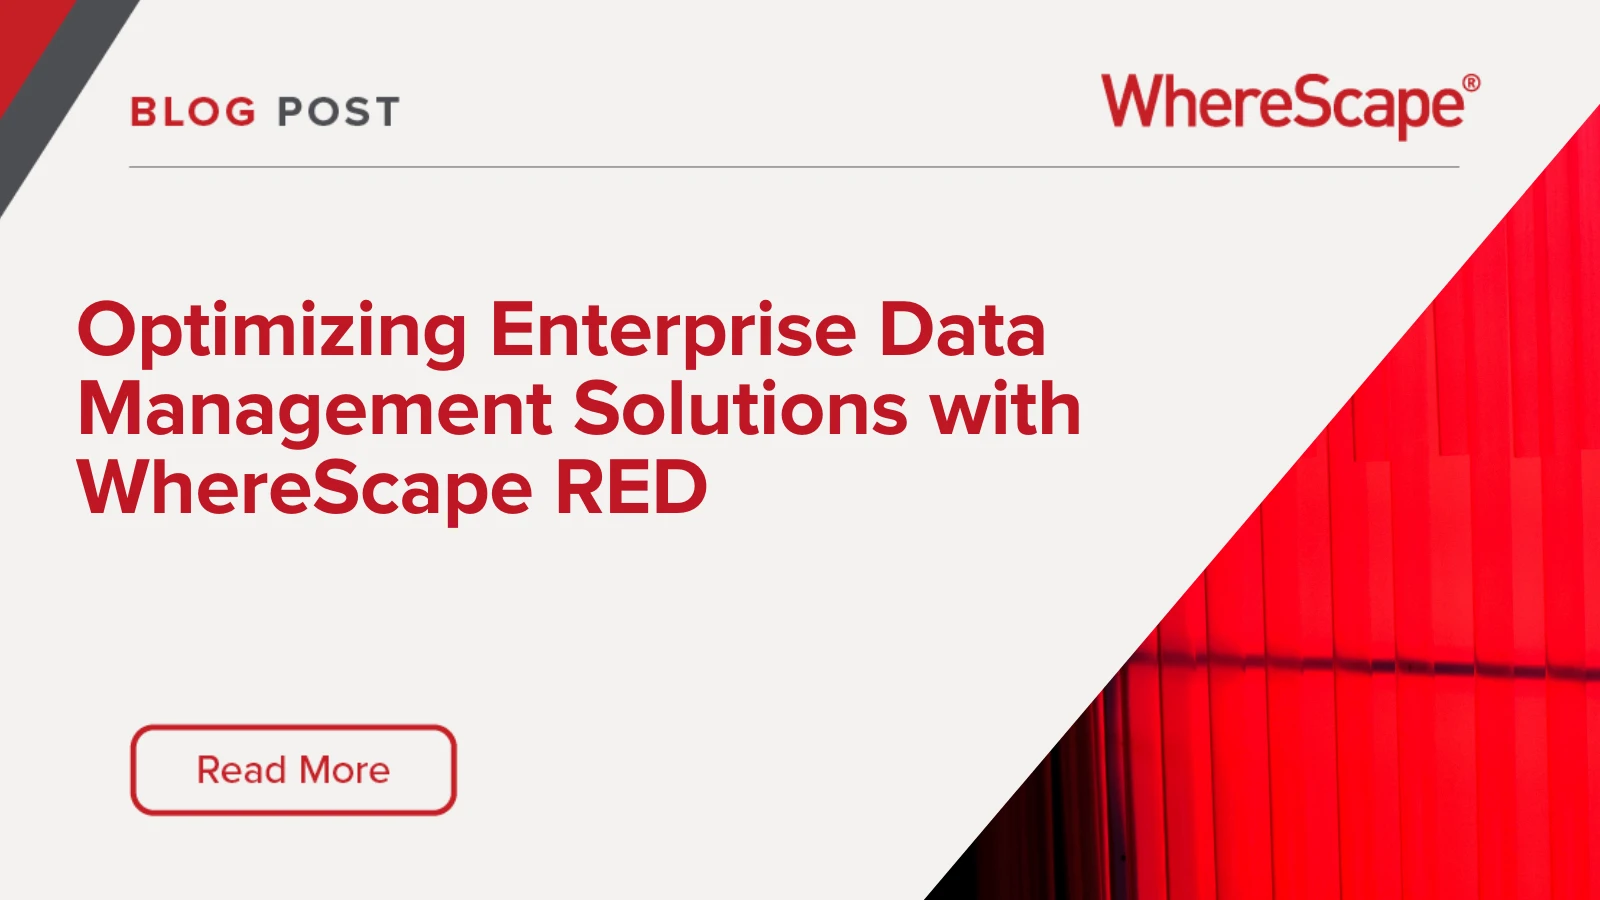 Blog title card for "Optimizing Enterprise Data Management Solutions with WhereScape RED"